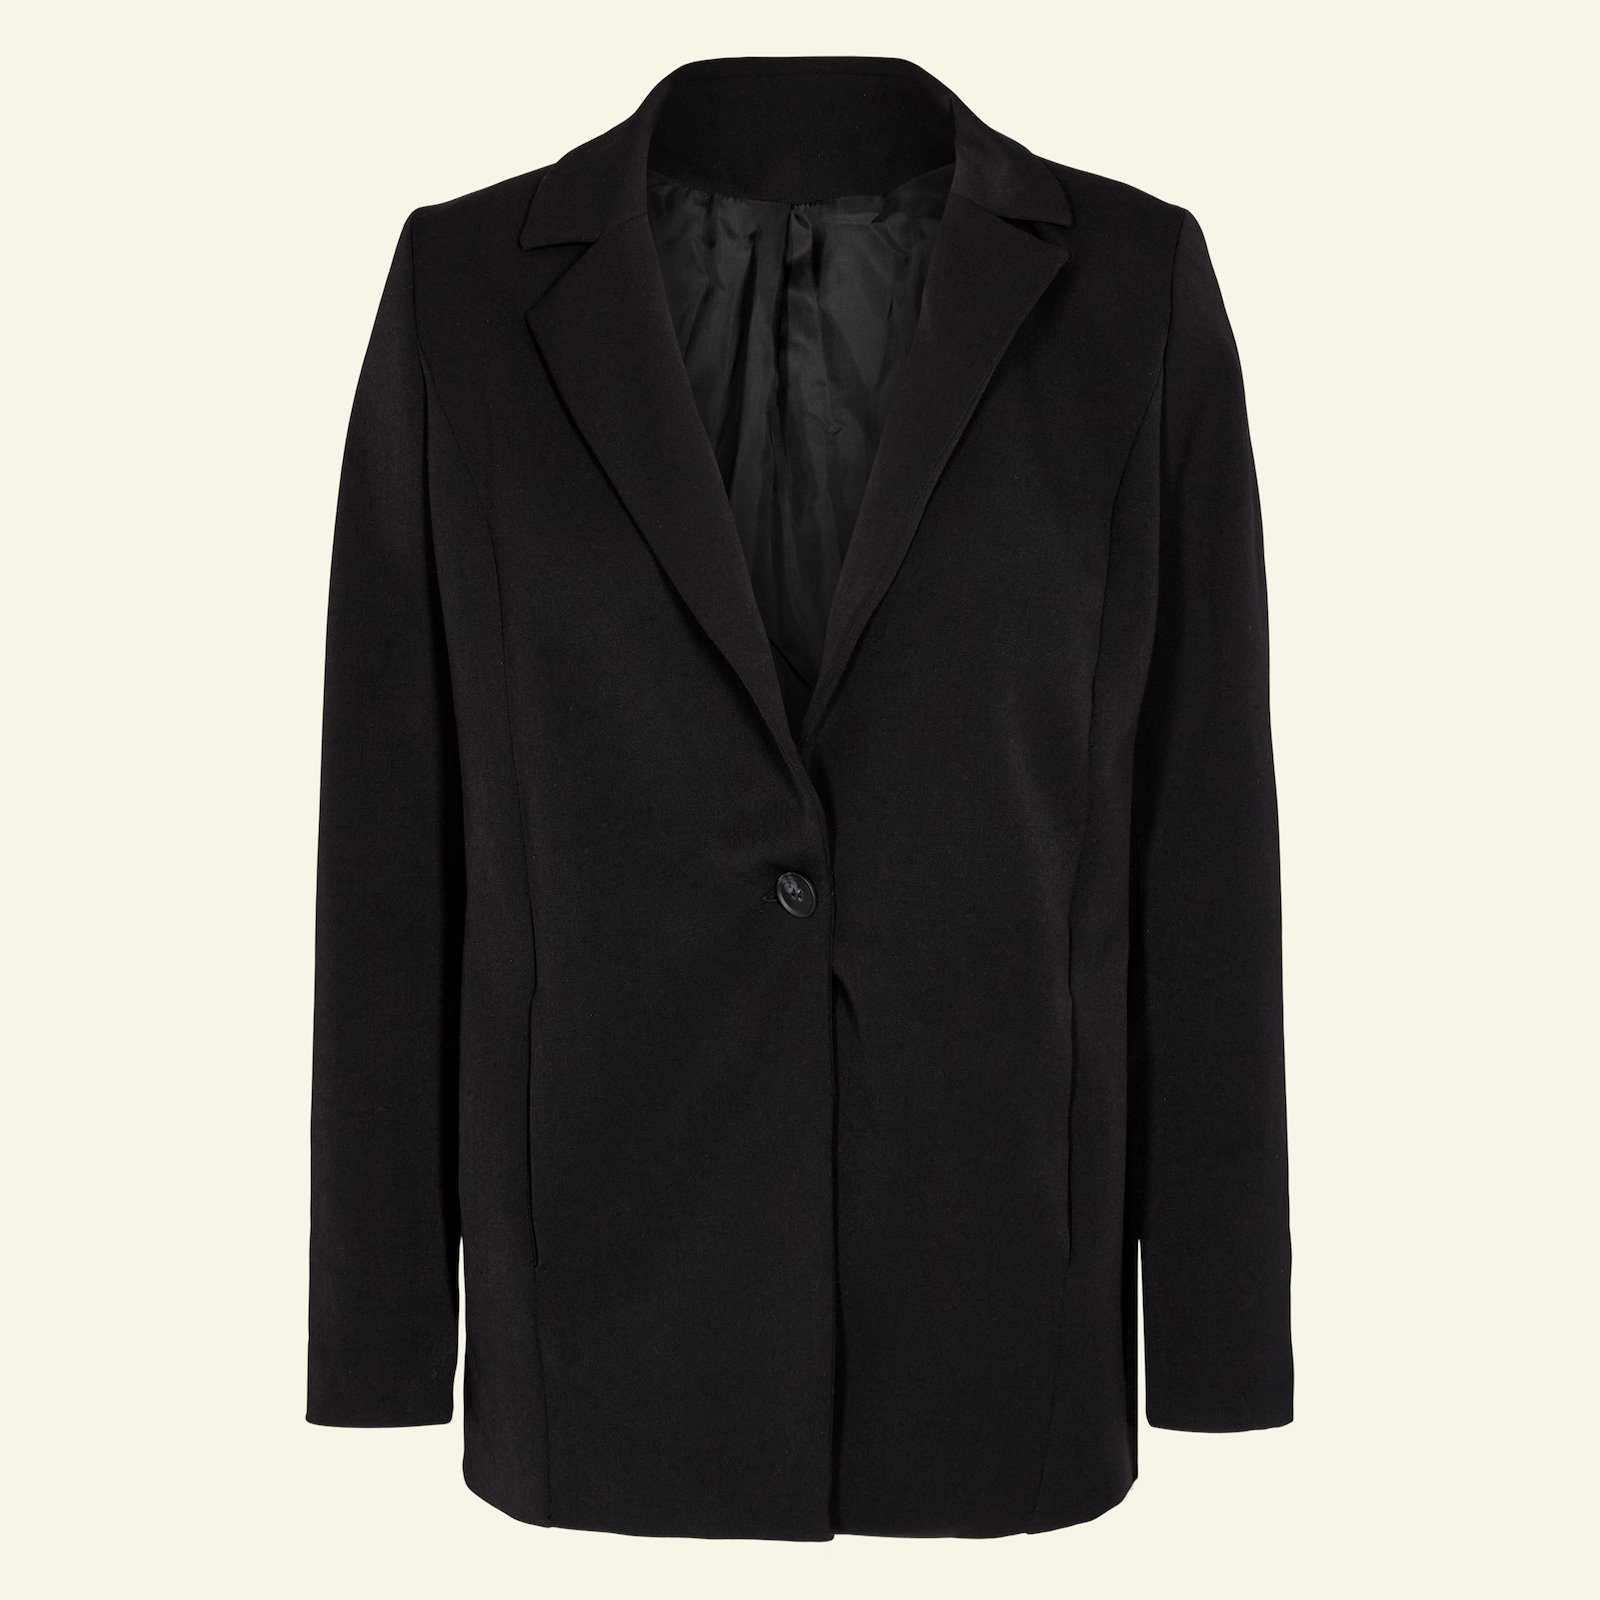 Suit jacket with lining, 42/14 p24048_460563_5043_40237_sskit